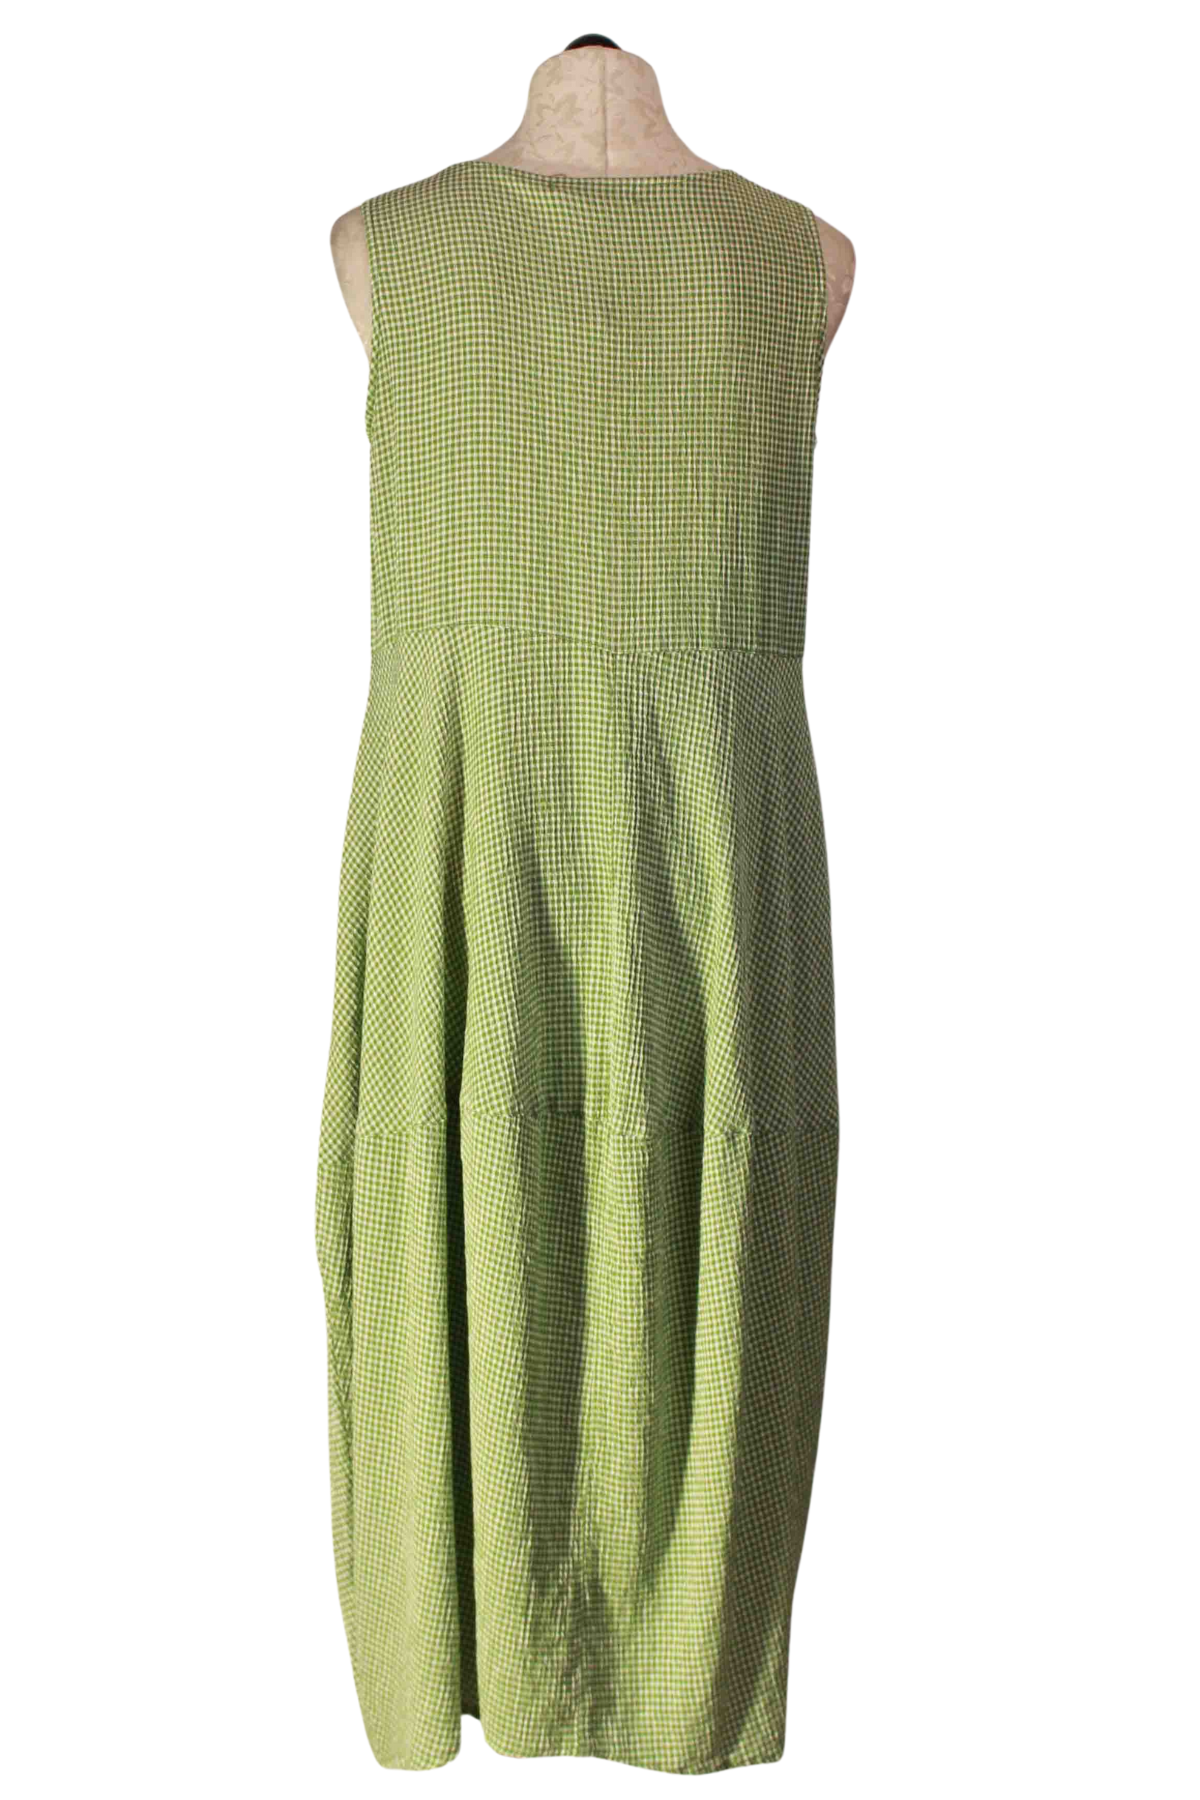 back view ofSeamed Bubble Dress by Cut Loose in a Fava Green Crinkle Check